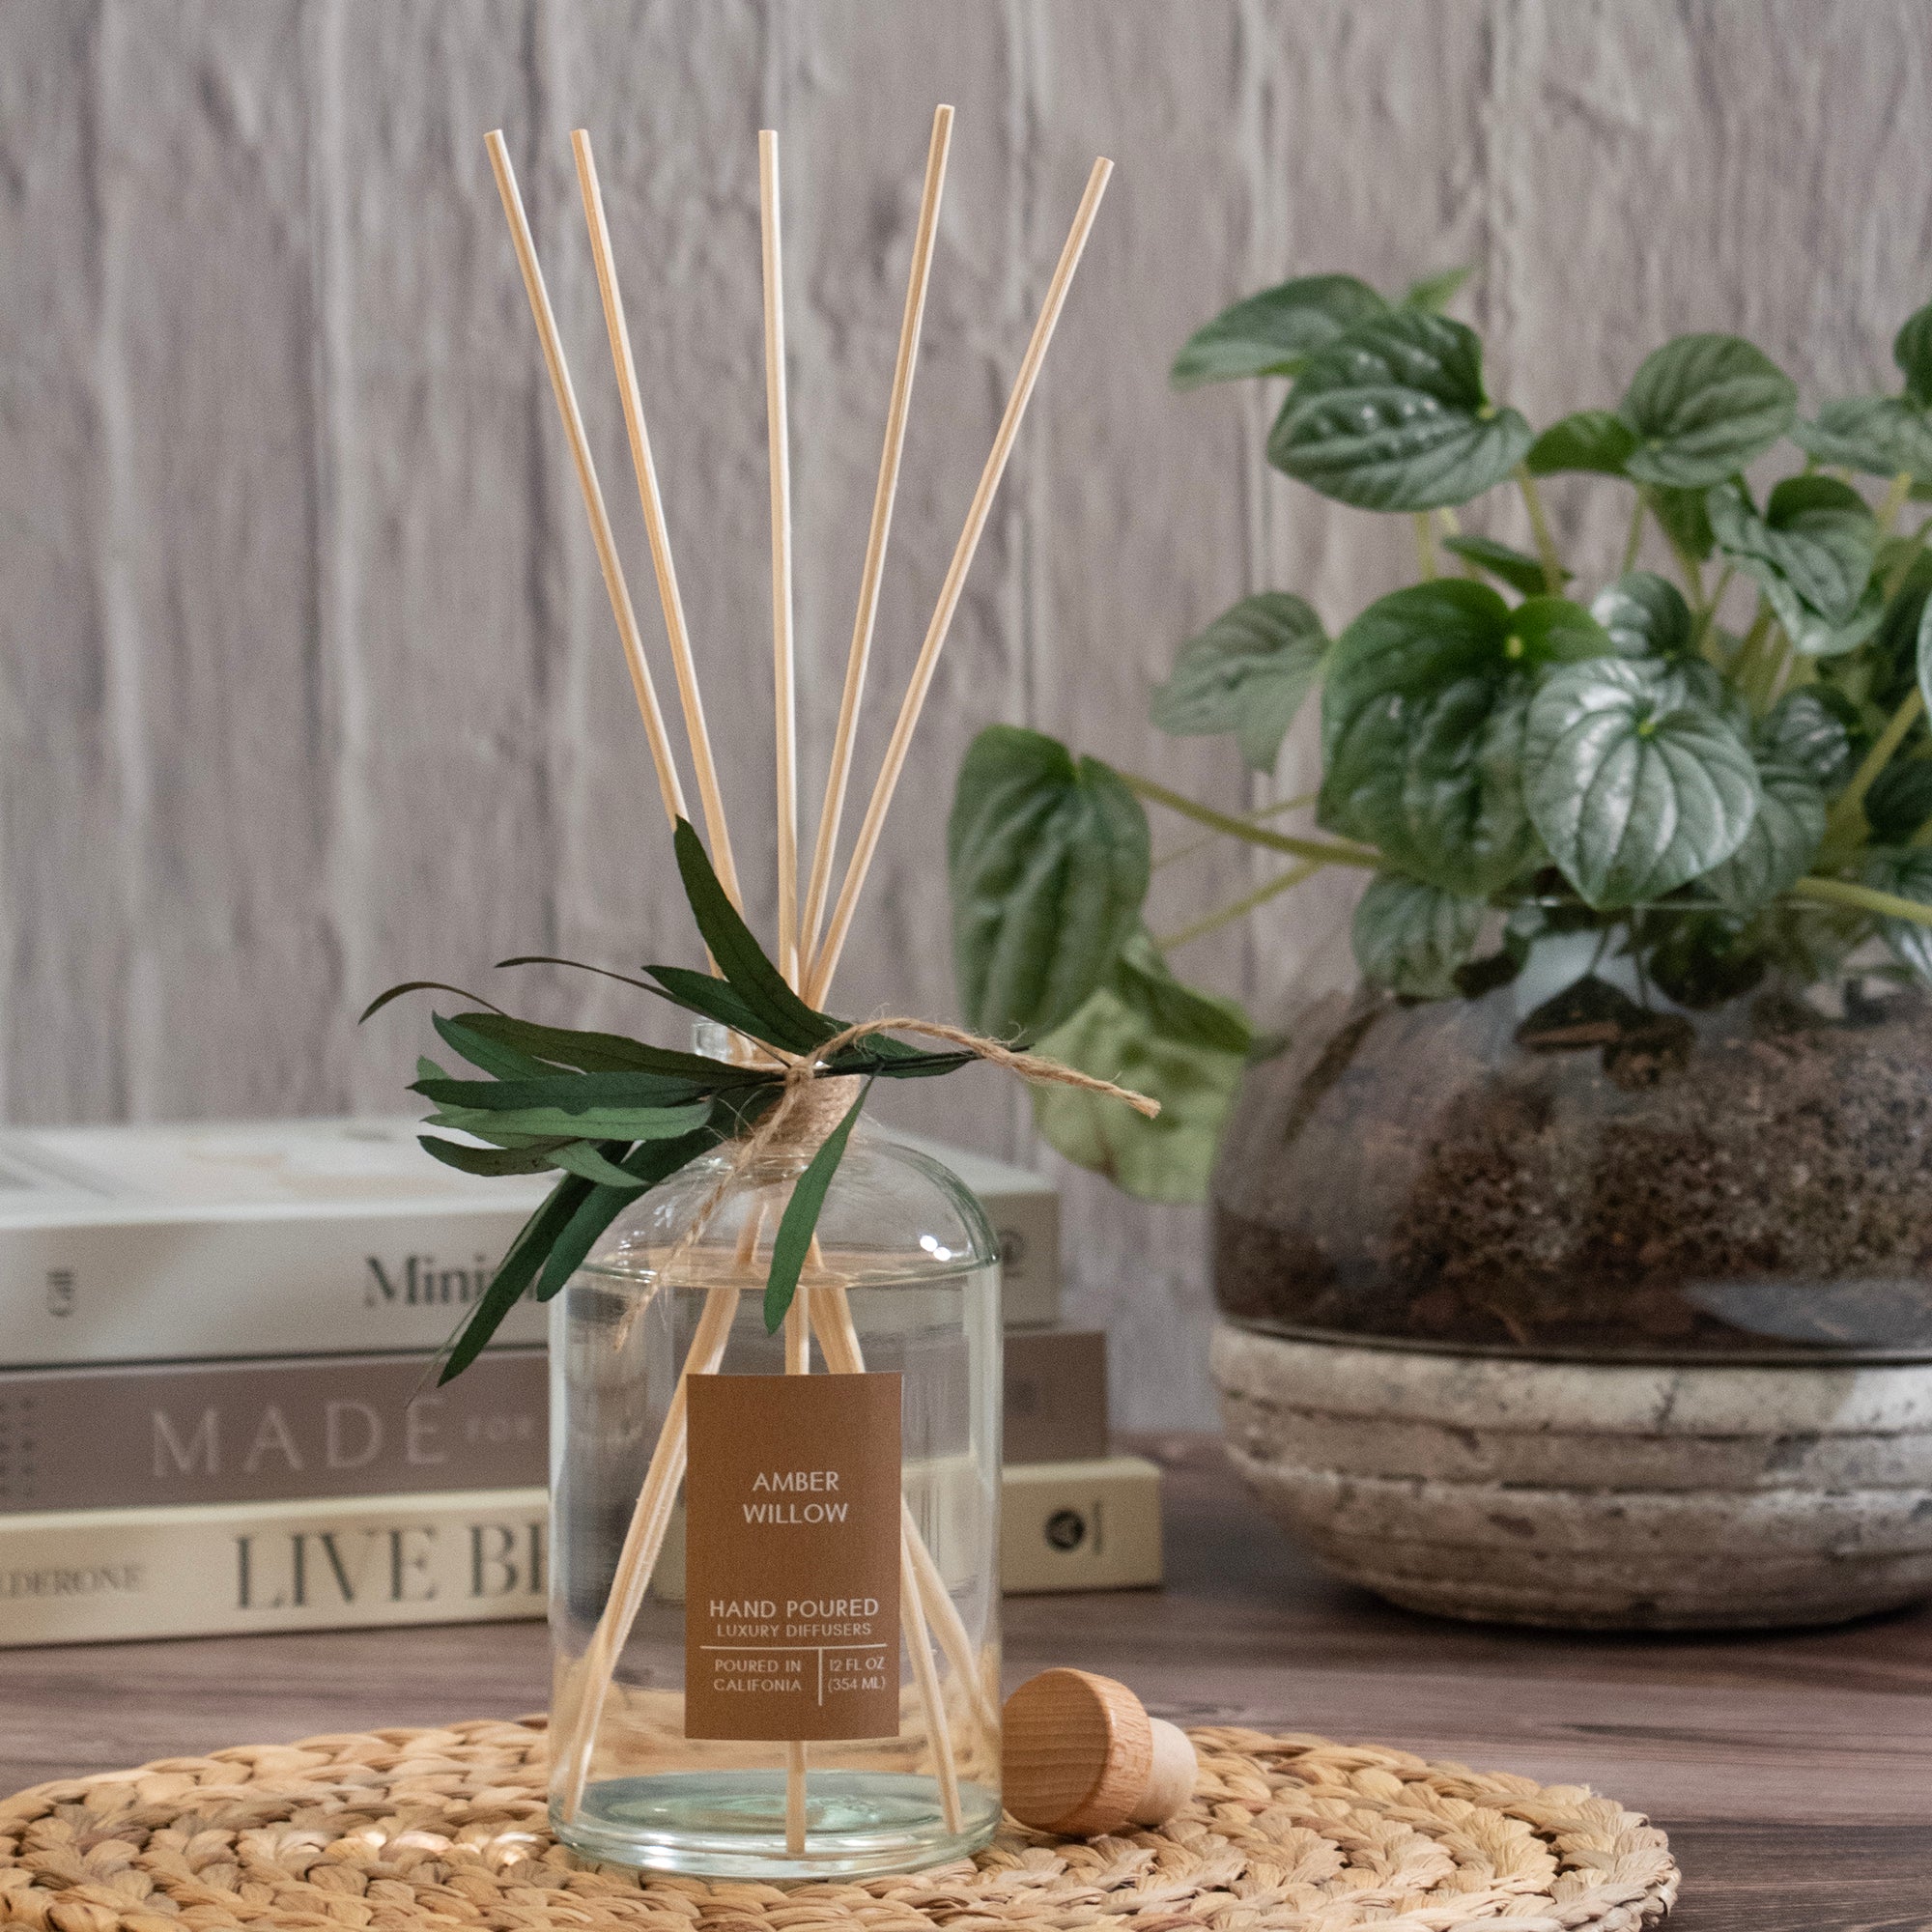 Amber Willow Botanical Tie Reed Diffuser